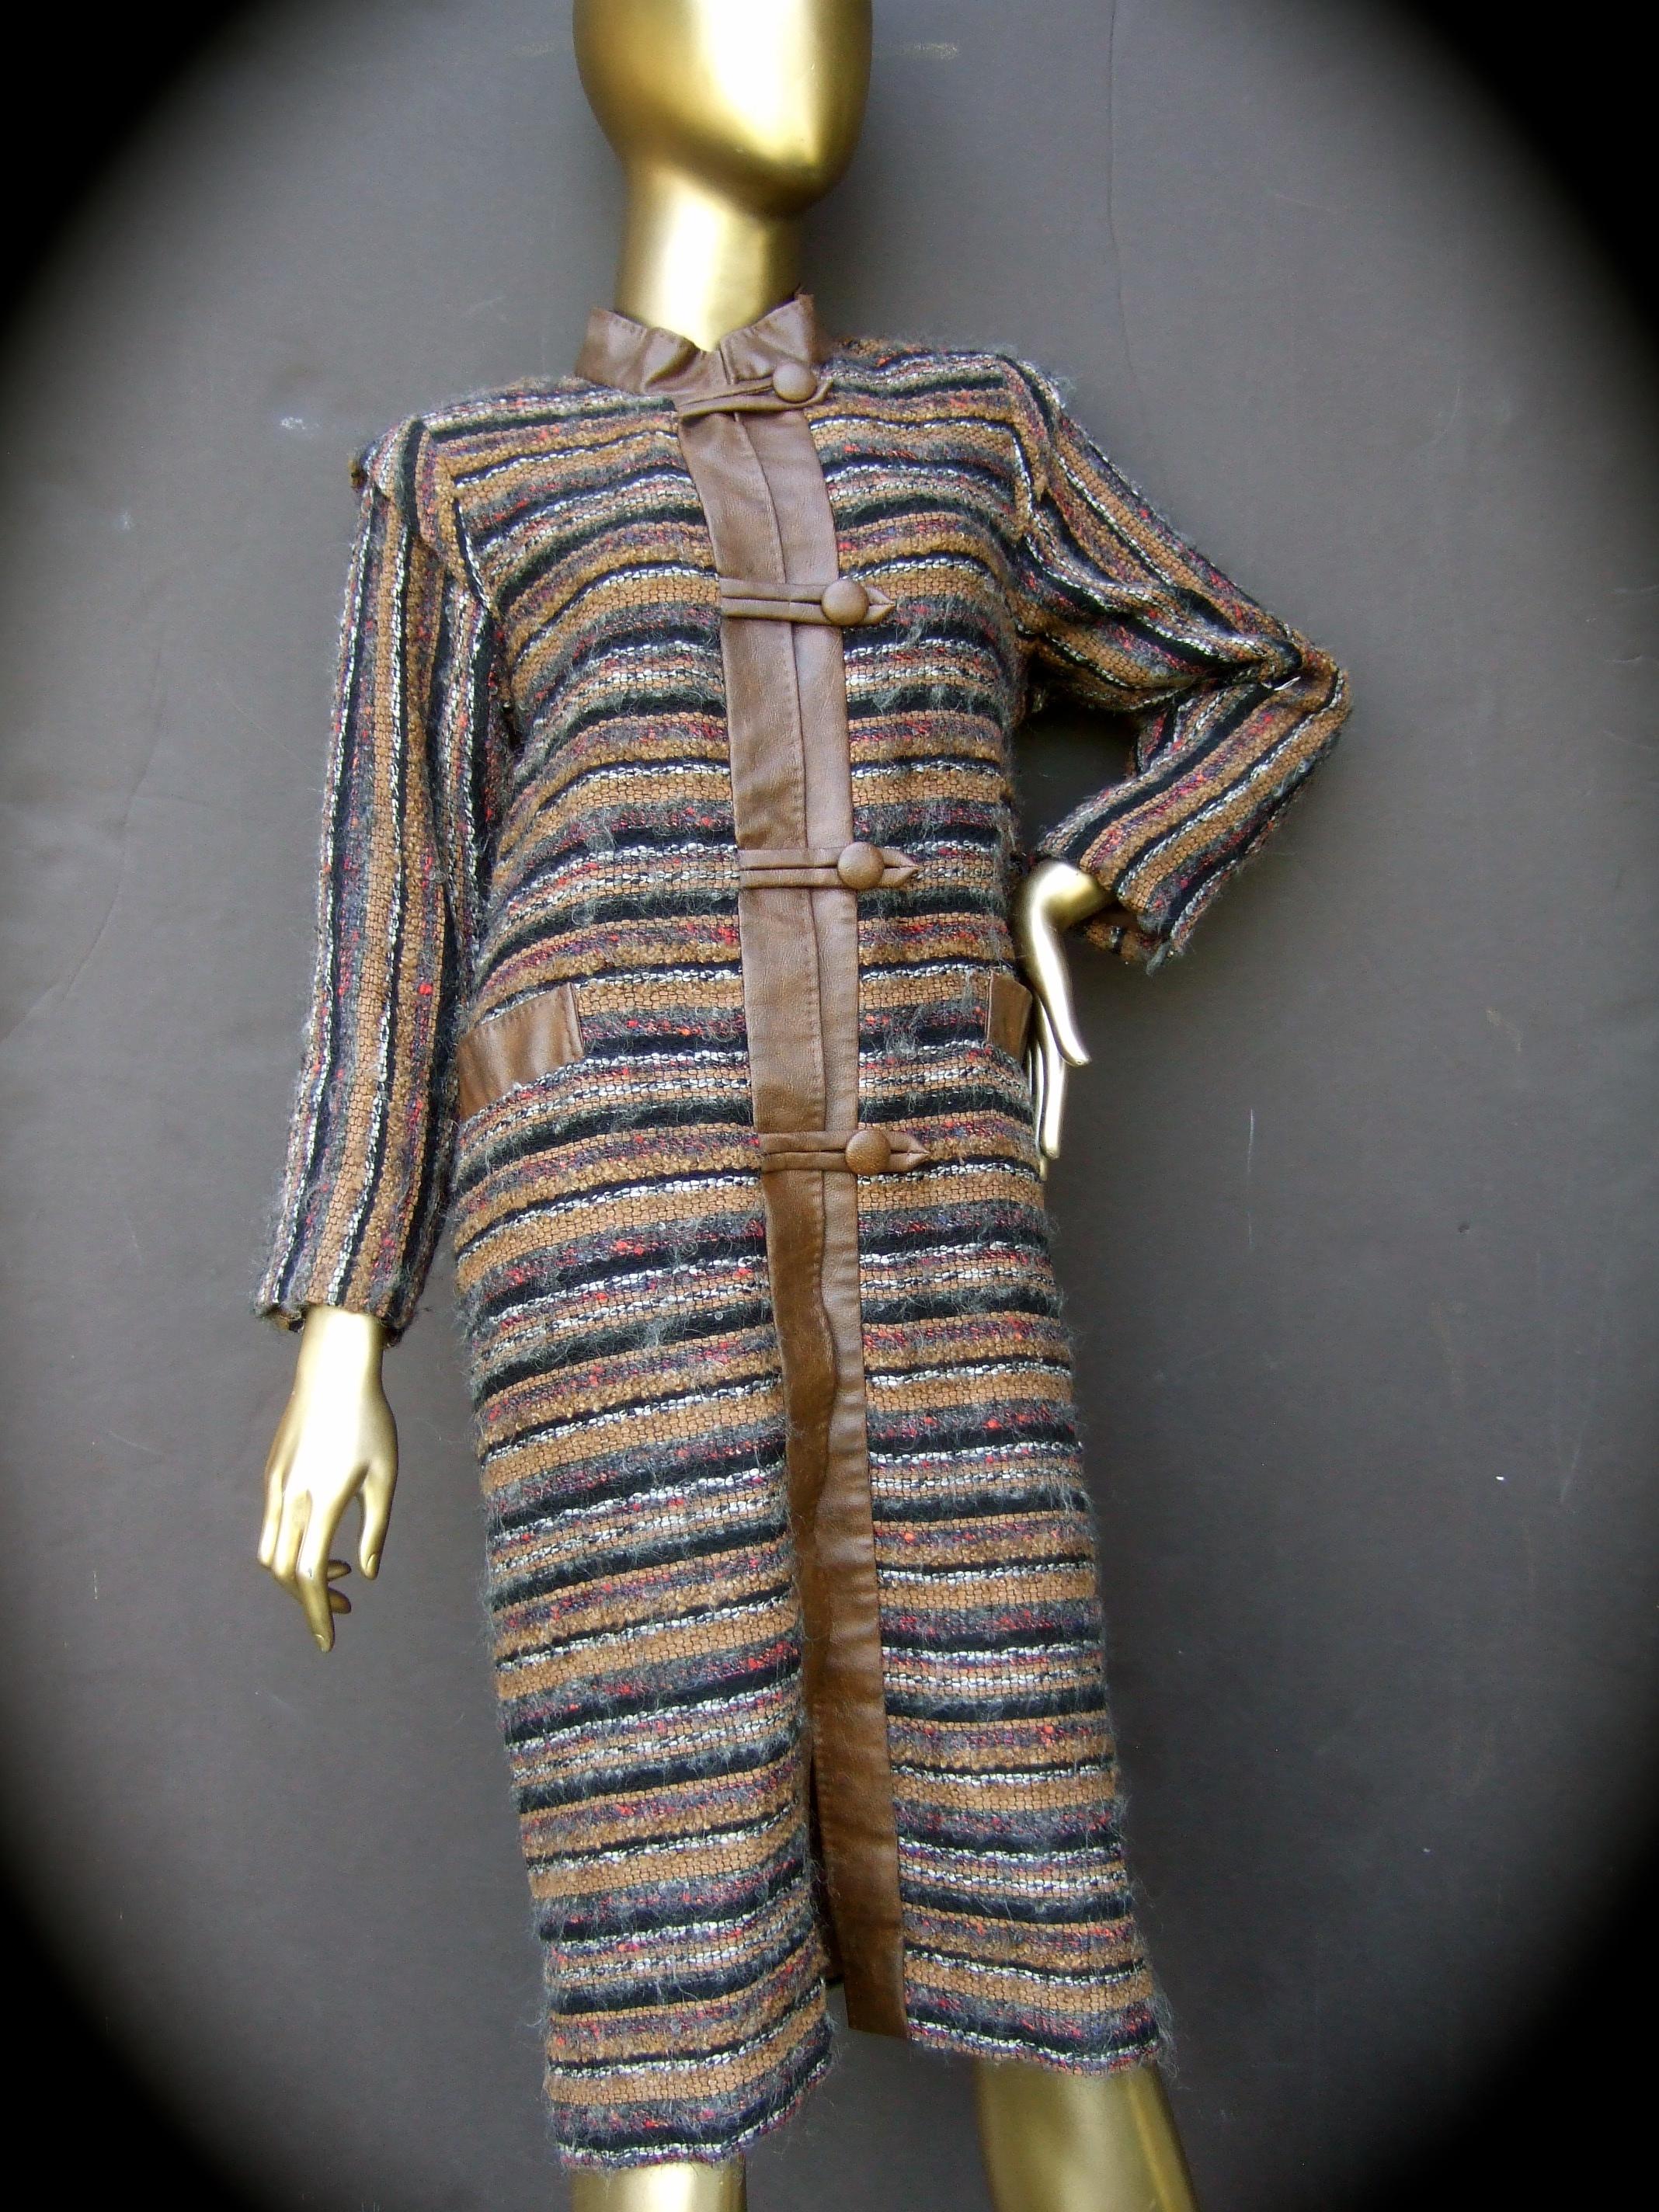 Yves Saint Laurent Horizontal striped fuzzy wool knit women's coat c 1970s
The stylish retro coat is designed with horizontal striped chunky wool
knit in earth tone colors. The sleeves in contrast are designed with vertical 
wool knit stripes